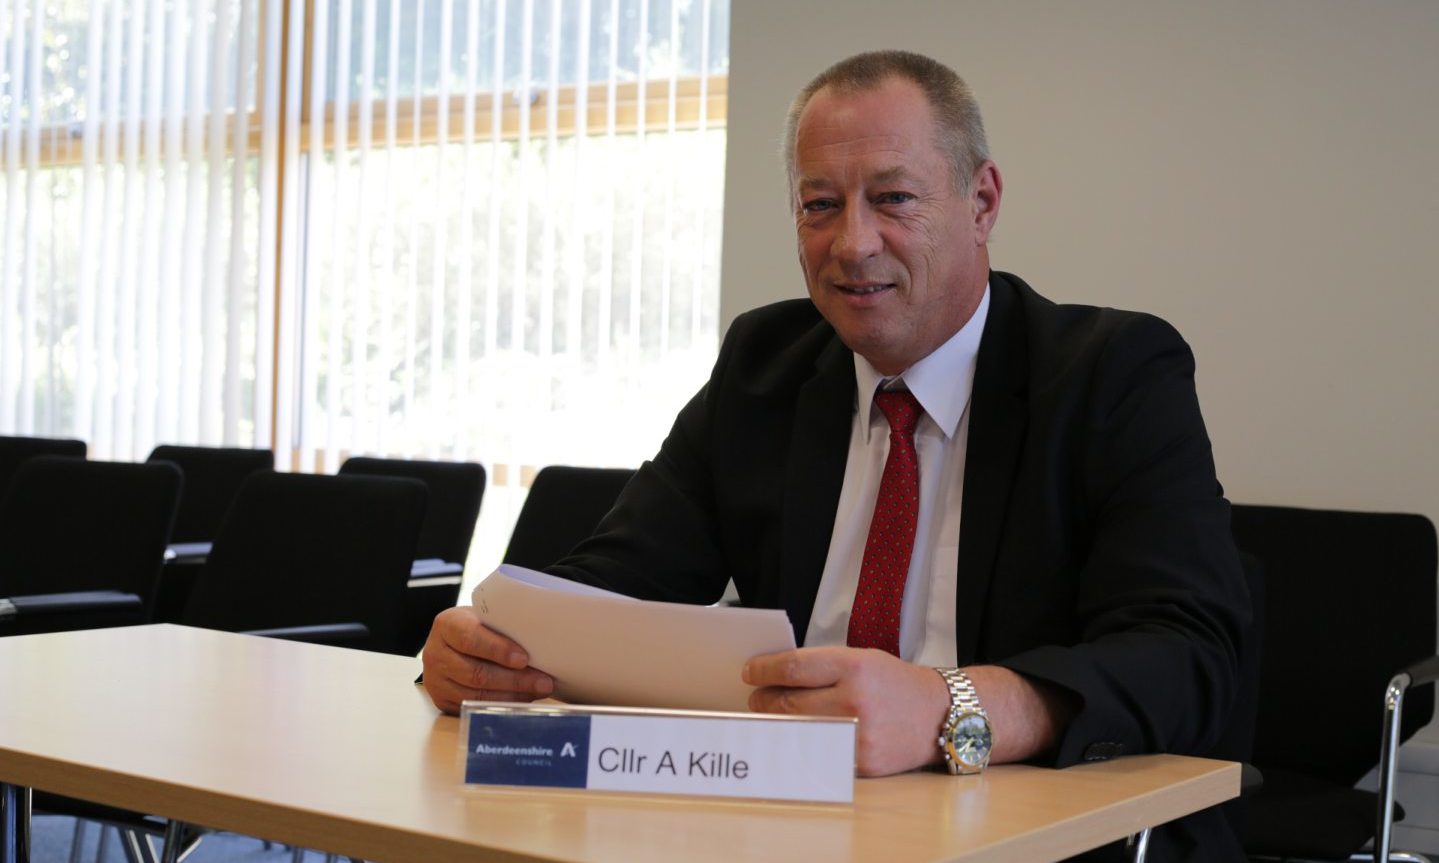 Aberdeenshire Council leader not seeking re-election due to health and family reasons